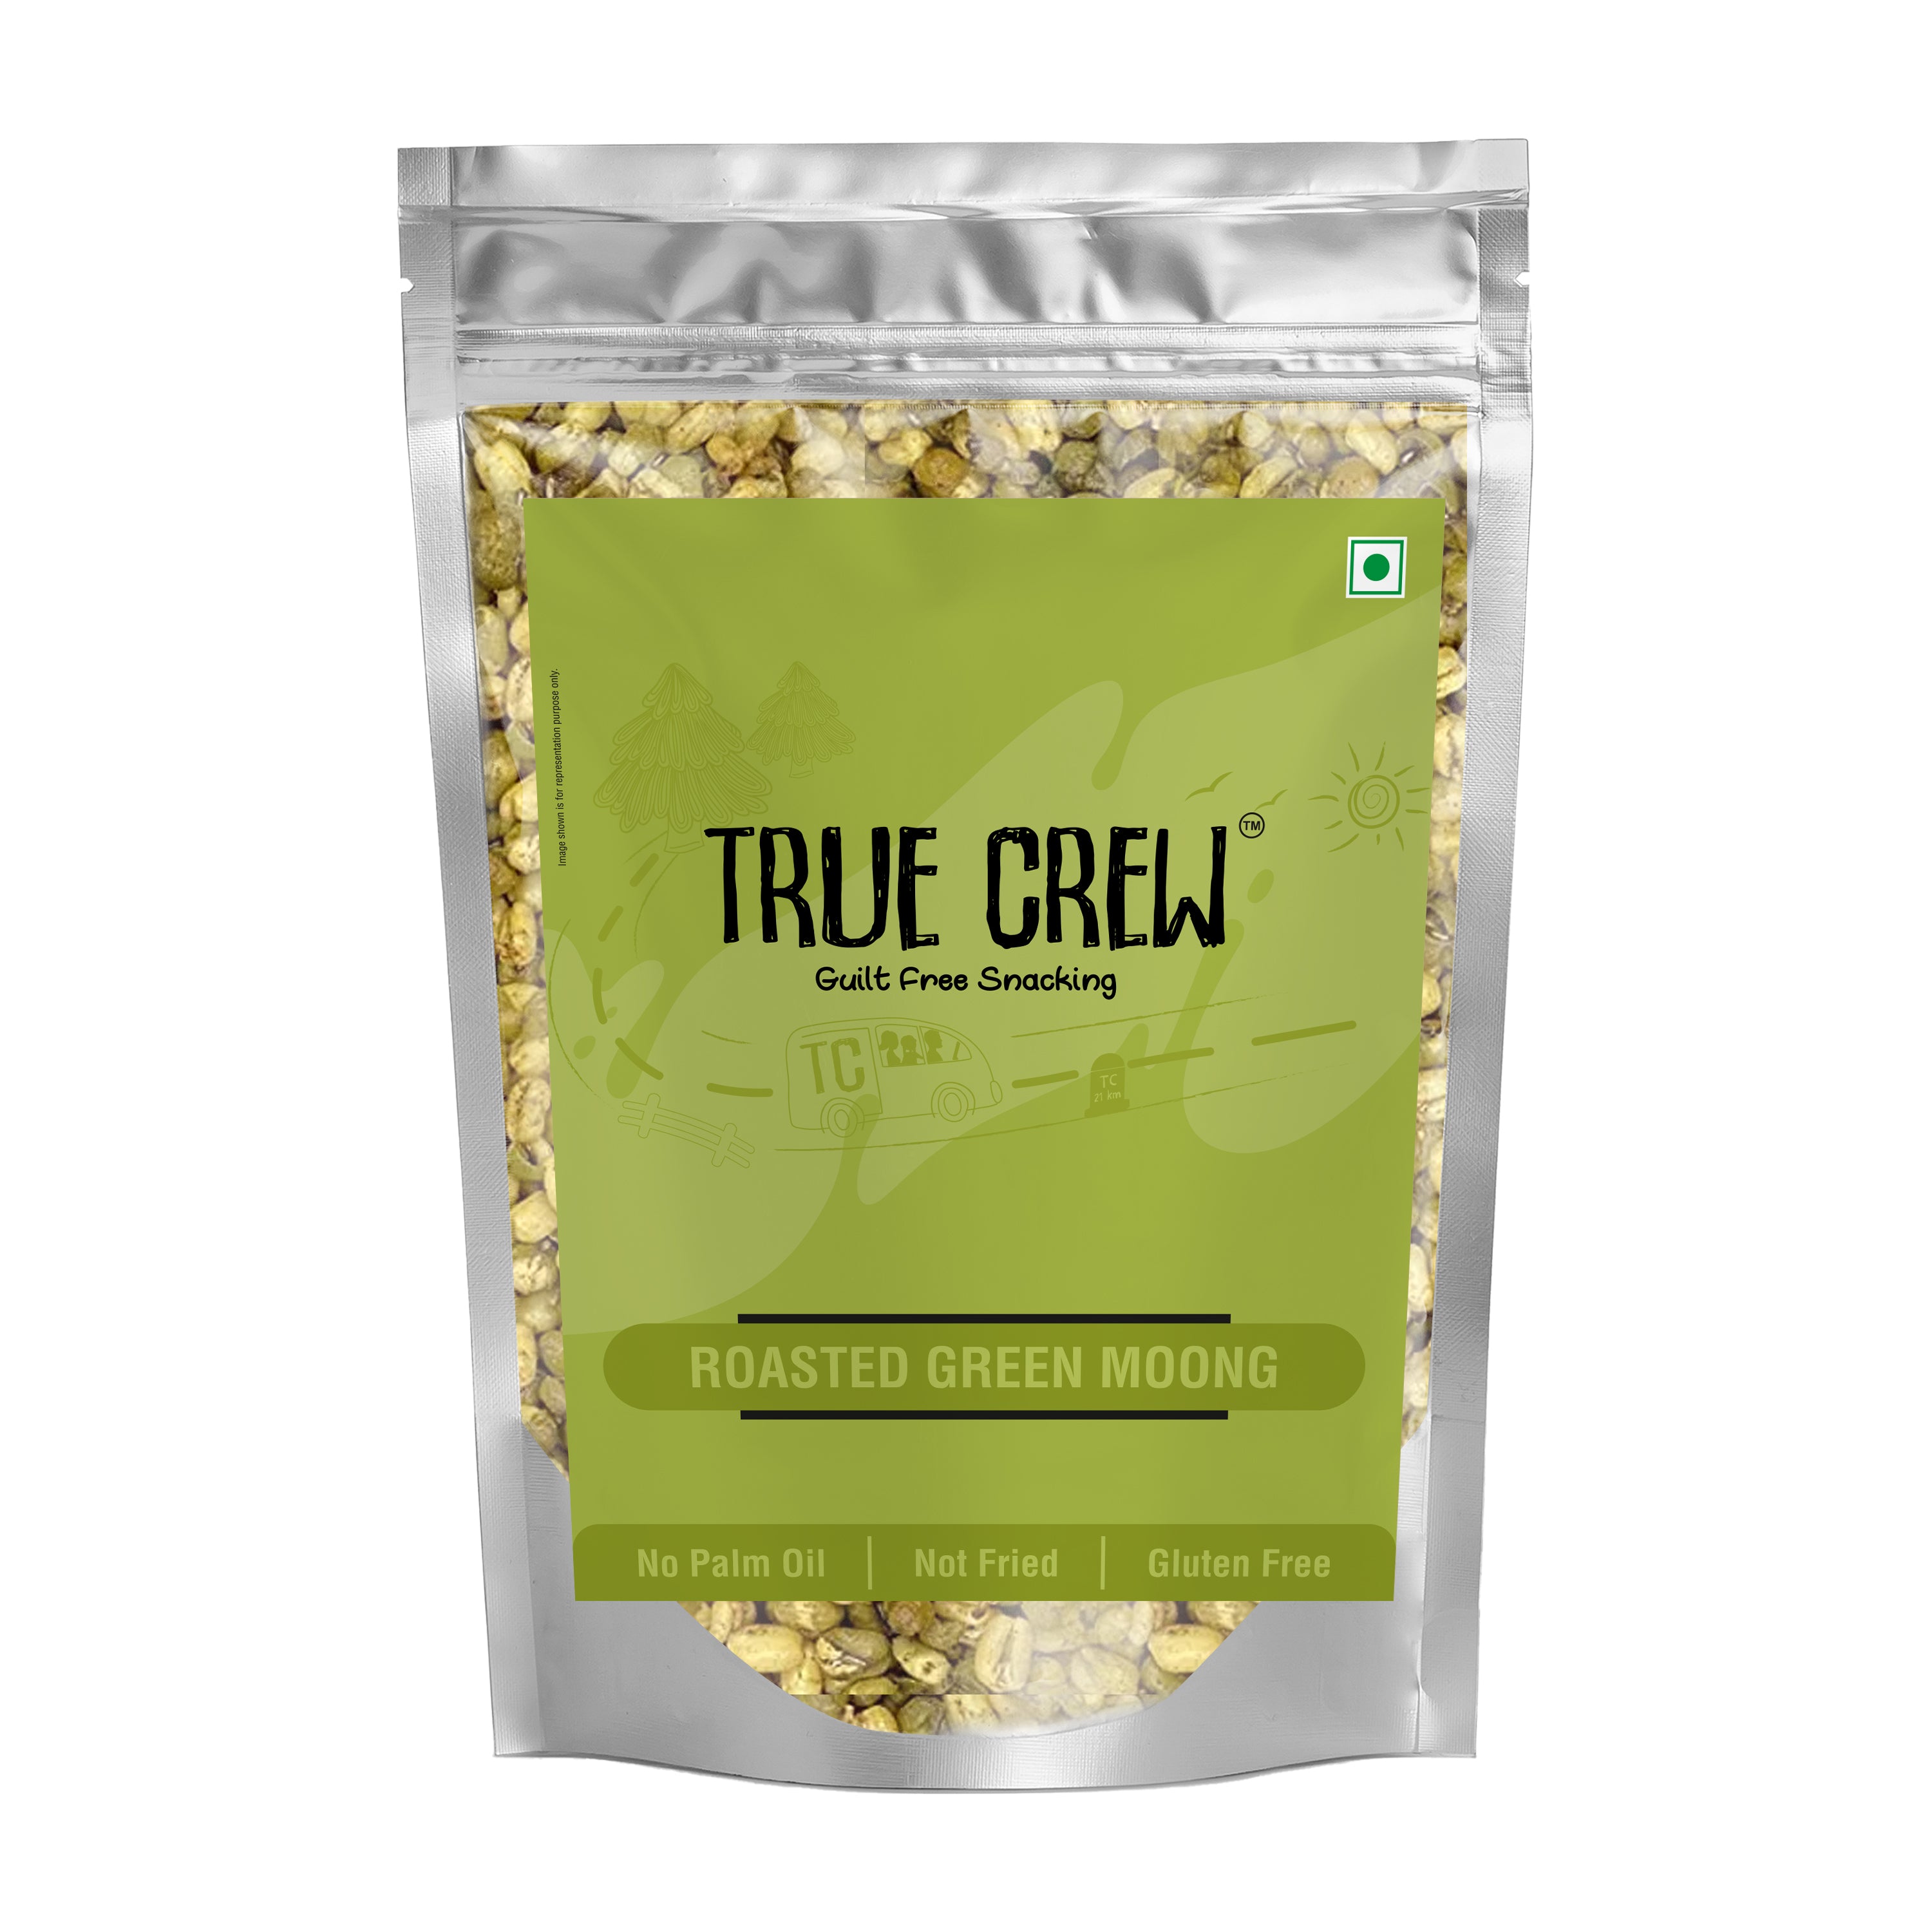 TRUE CREW Roasted Green Moong Pouch 150 g